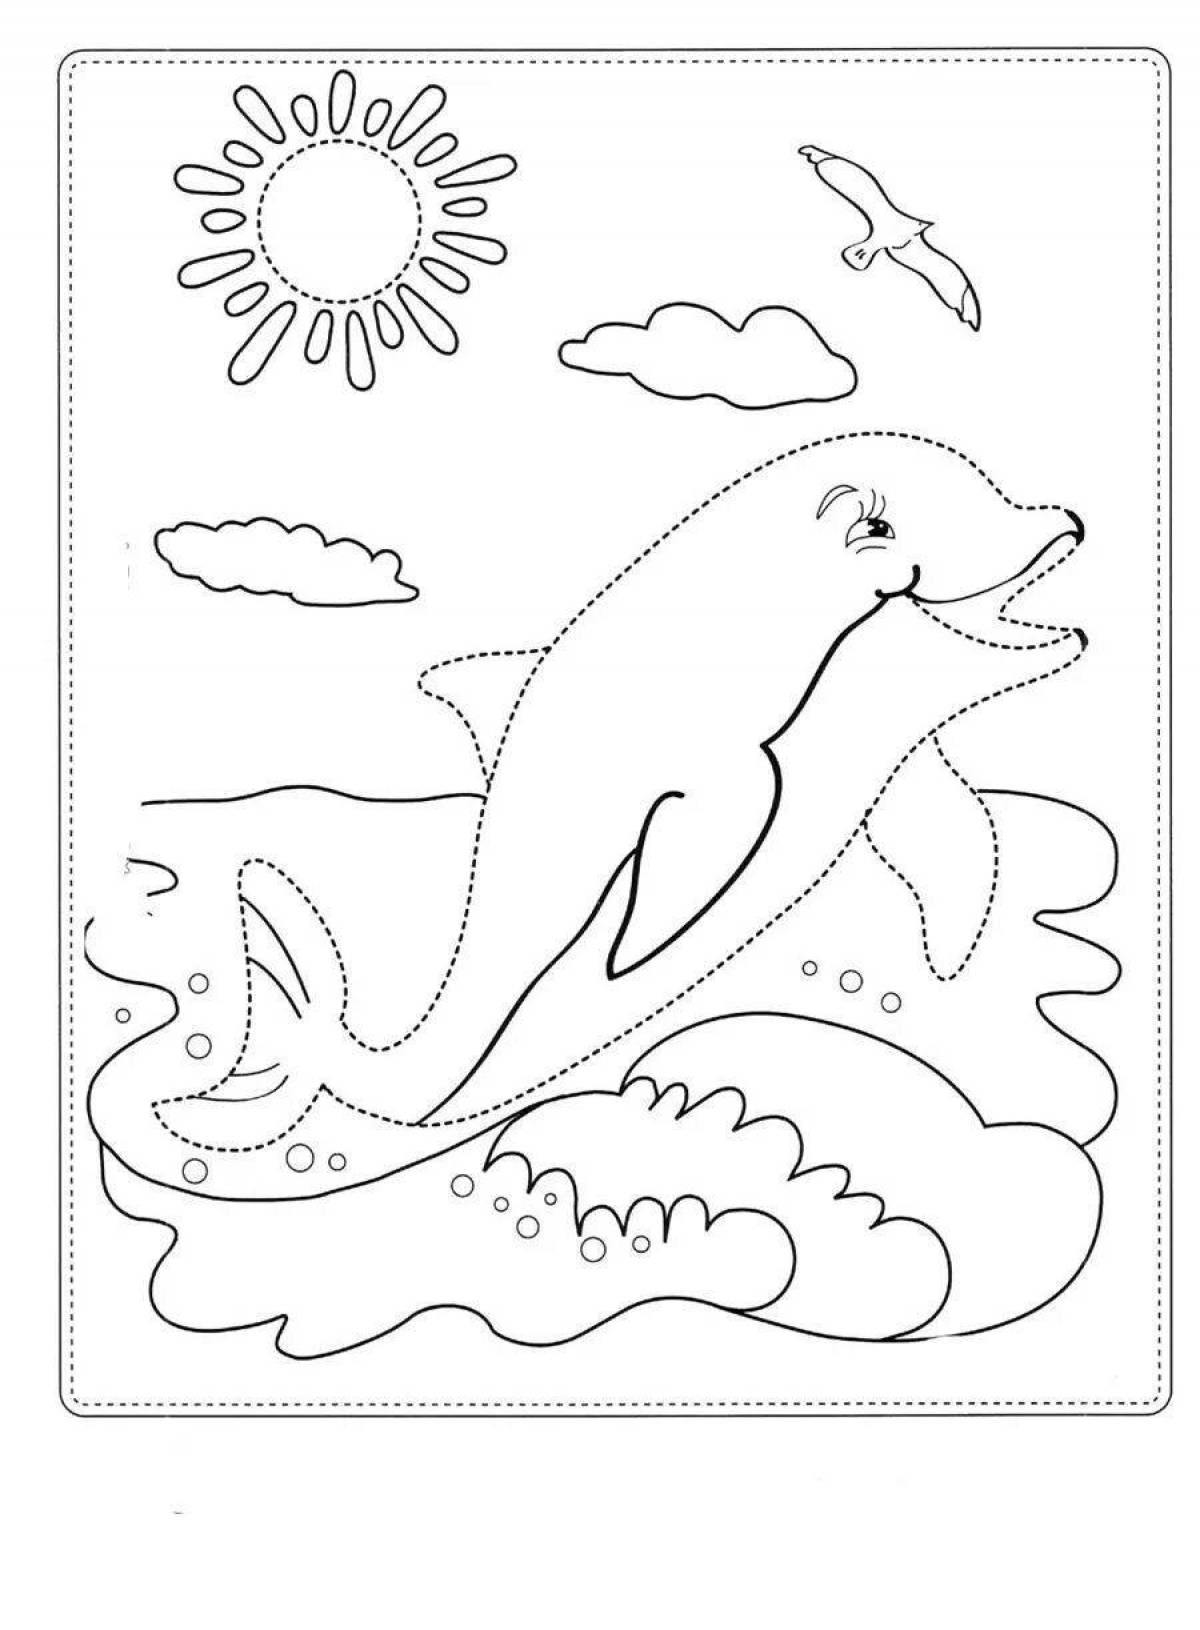 Dolphin picturesque coloring page